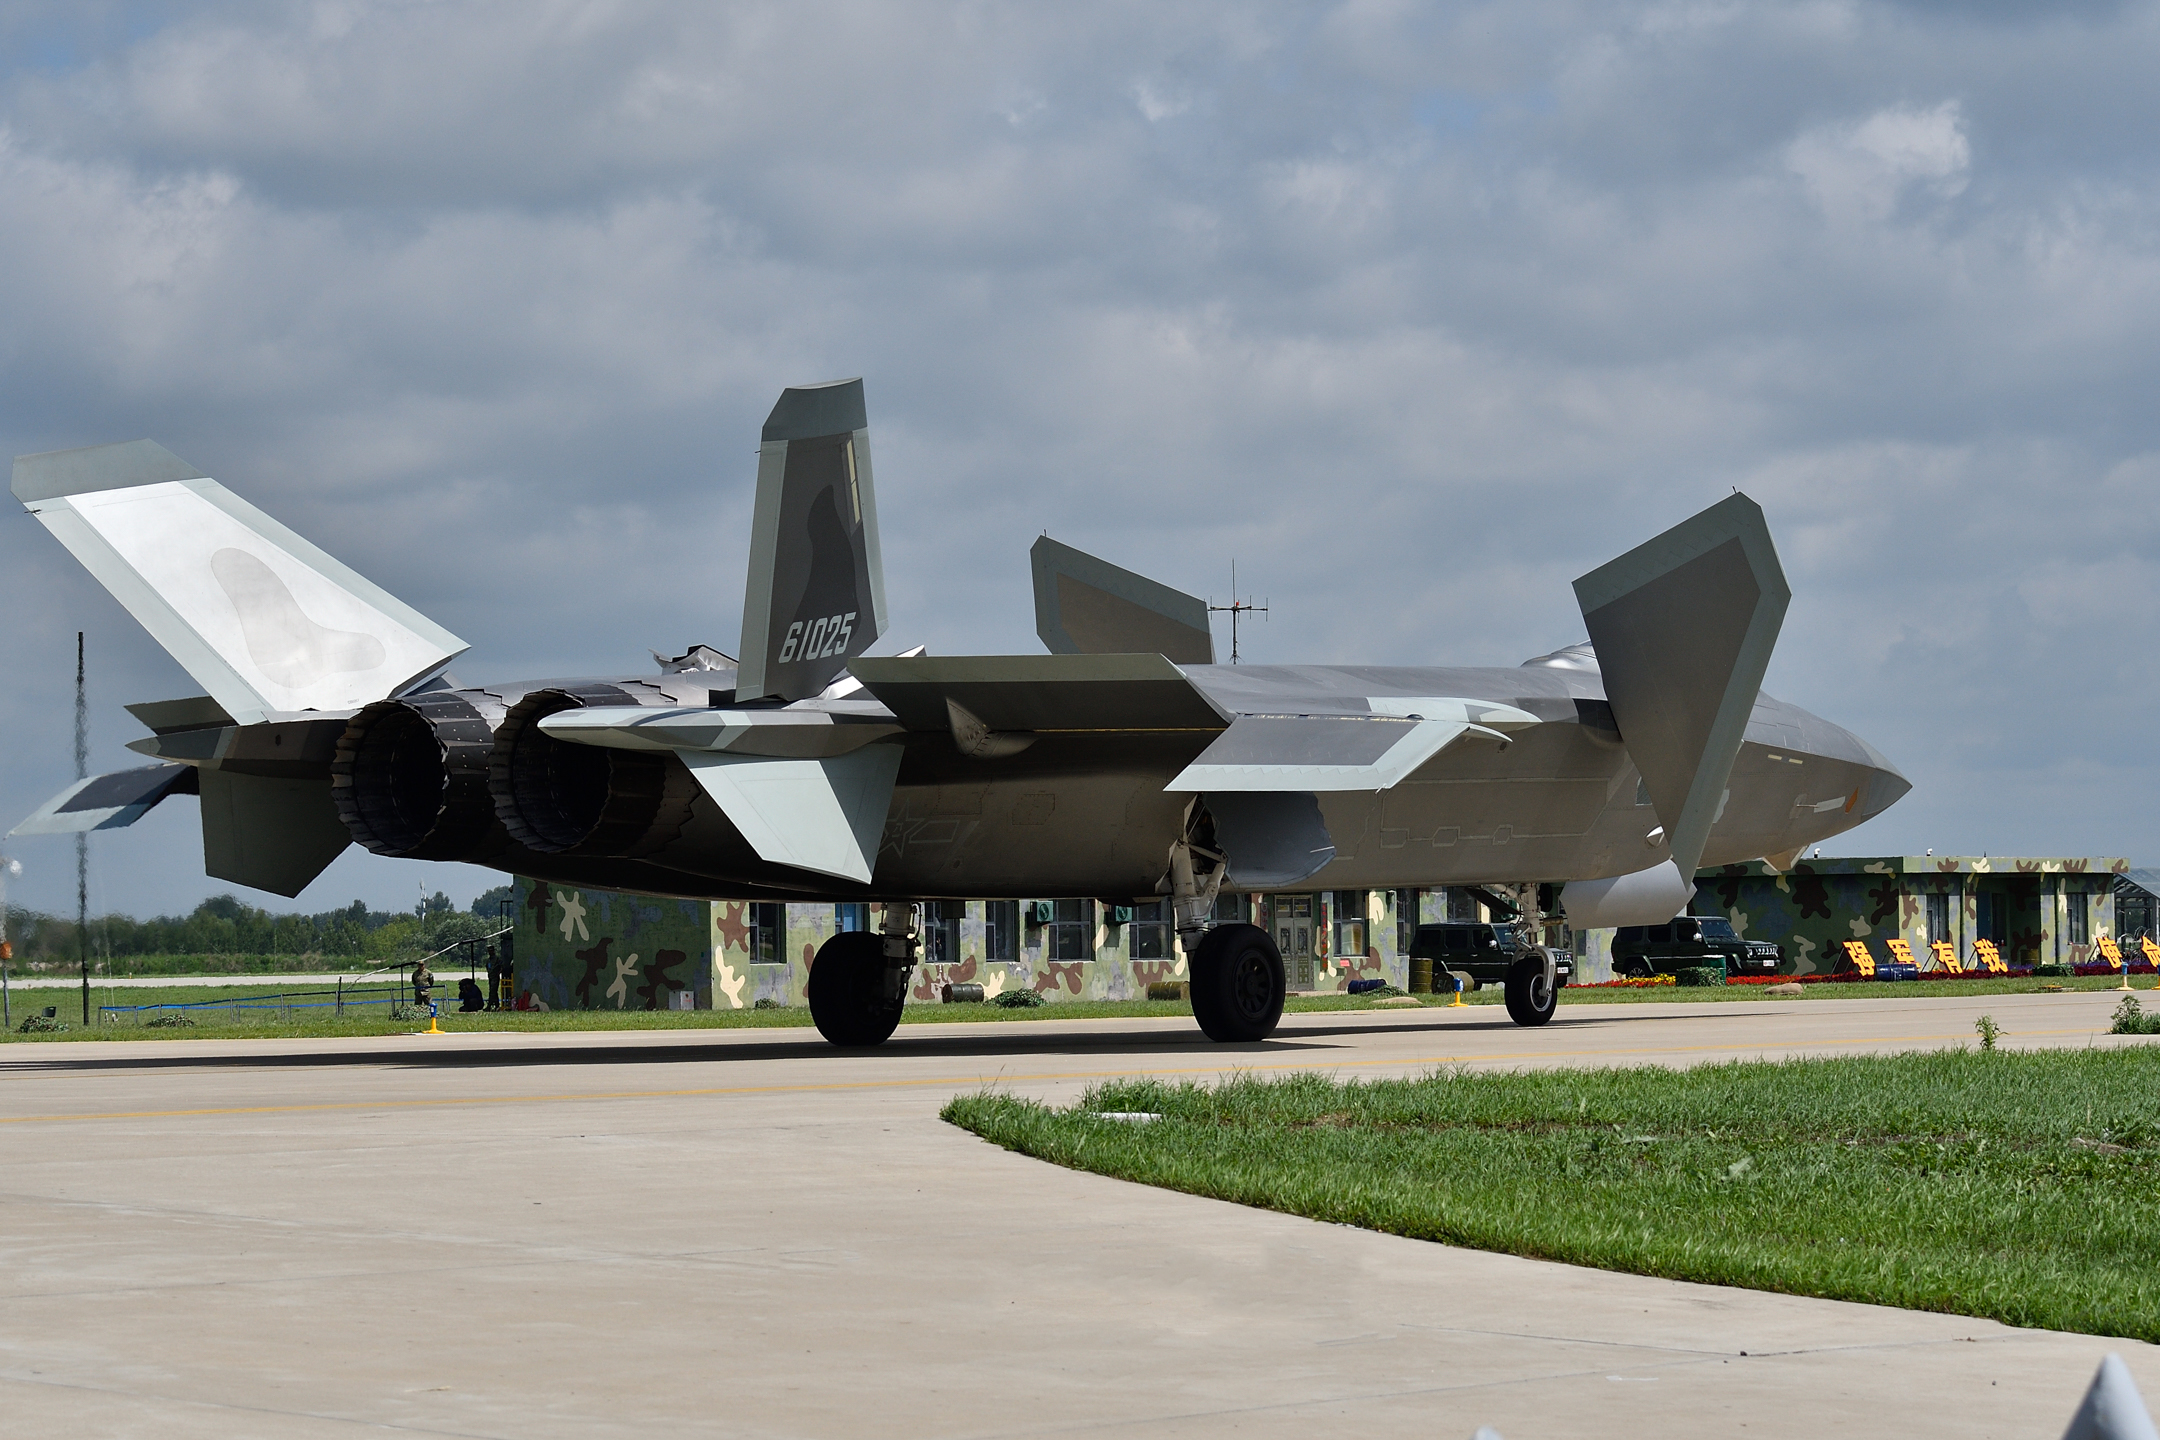 General 2160x1440 PLAAF Chengdu J-20 military military aircraft military vehicle clouds sky grass rear view